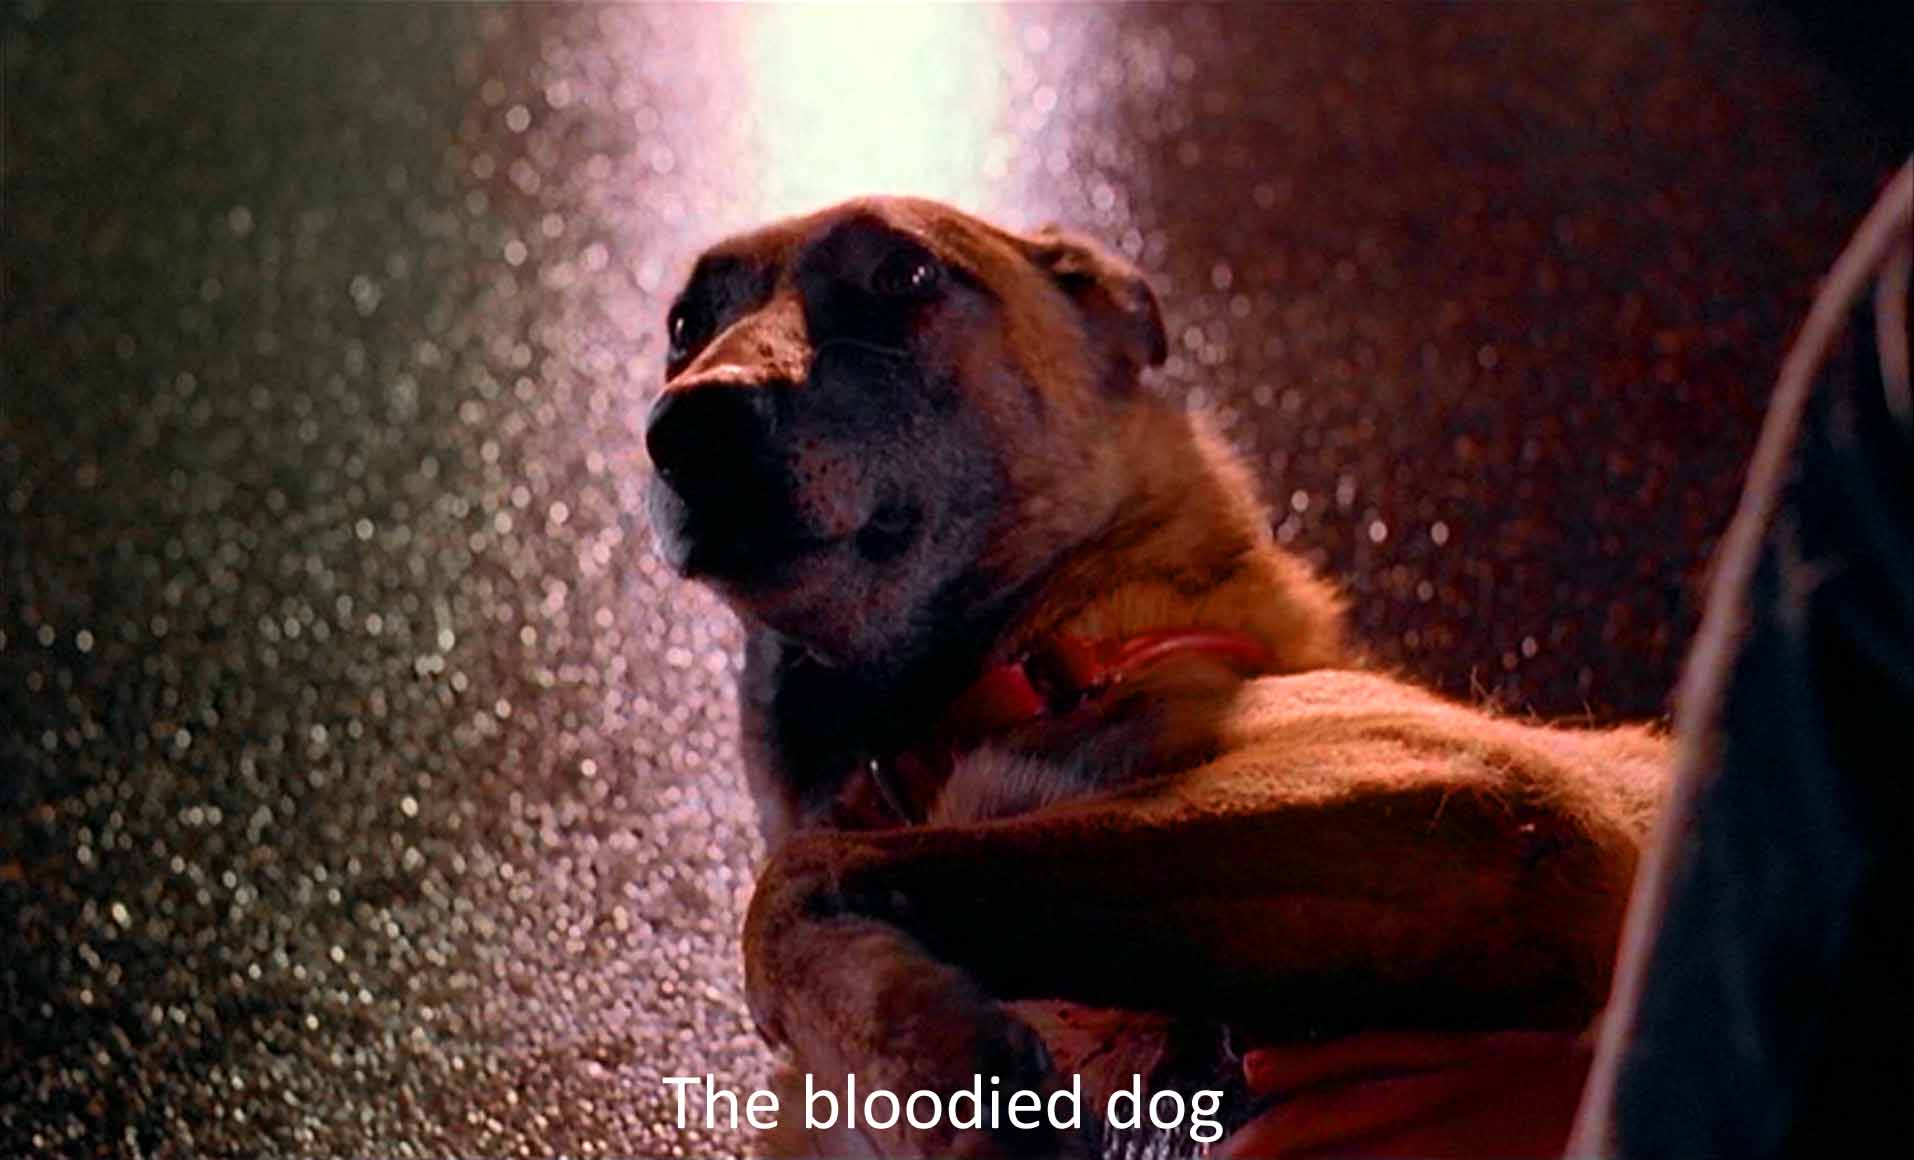 The bloodied dog